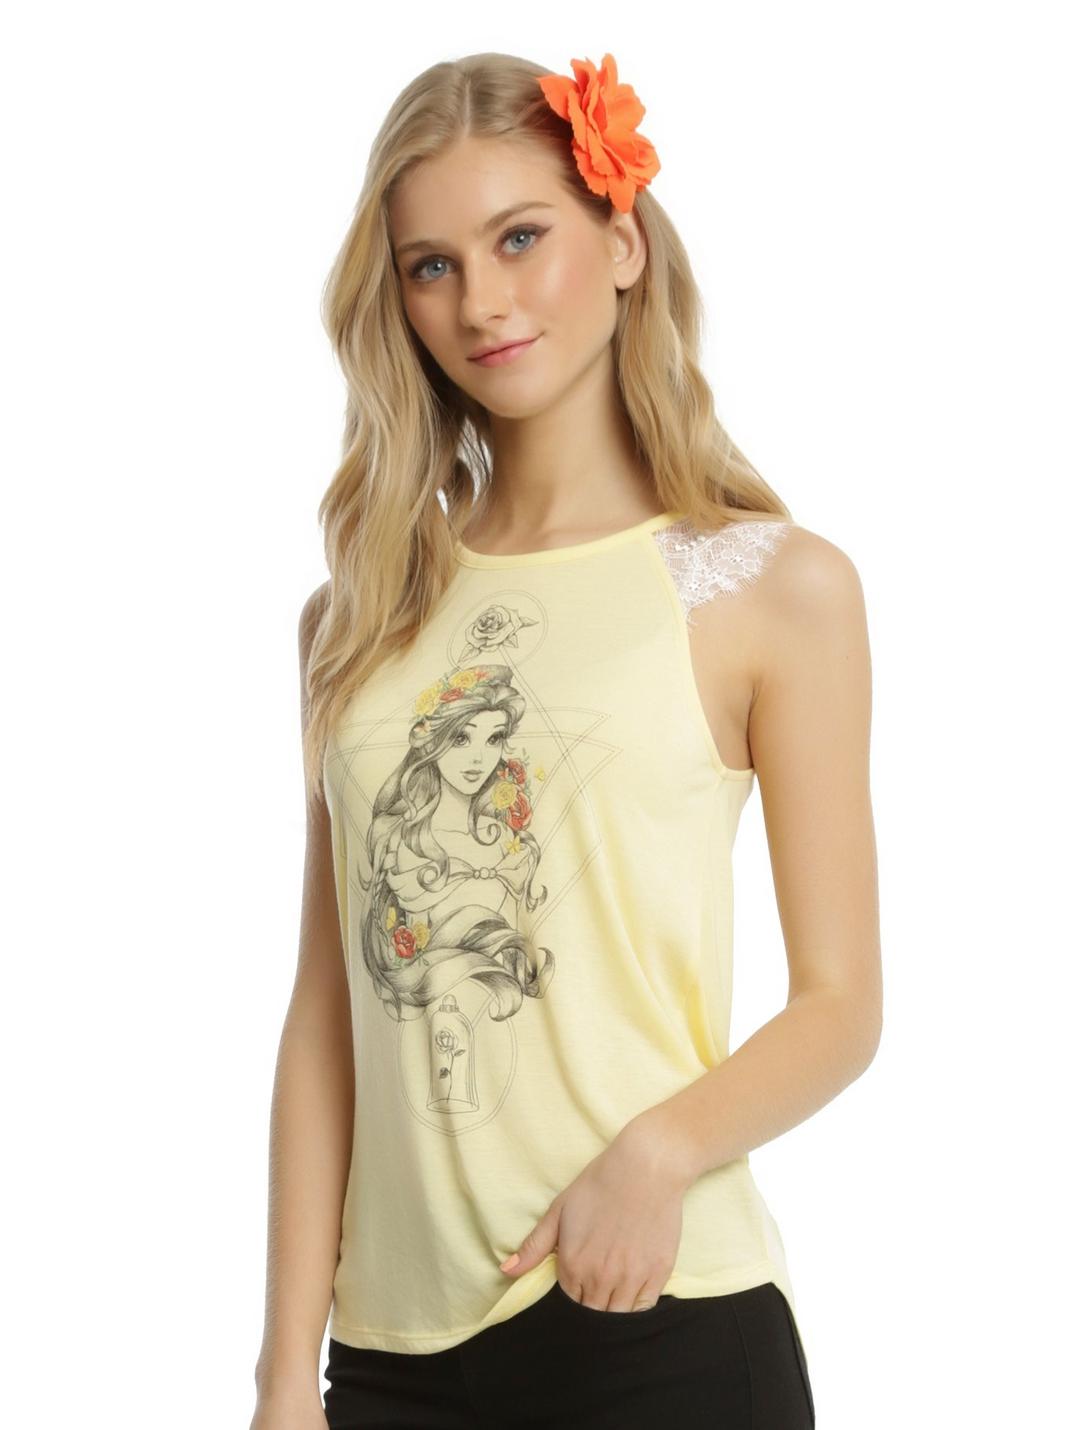 Disney Beauty And The Beast Belle Lace Sleeve Girls Tank Top, YELLOW, hi-res